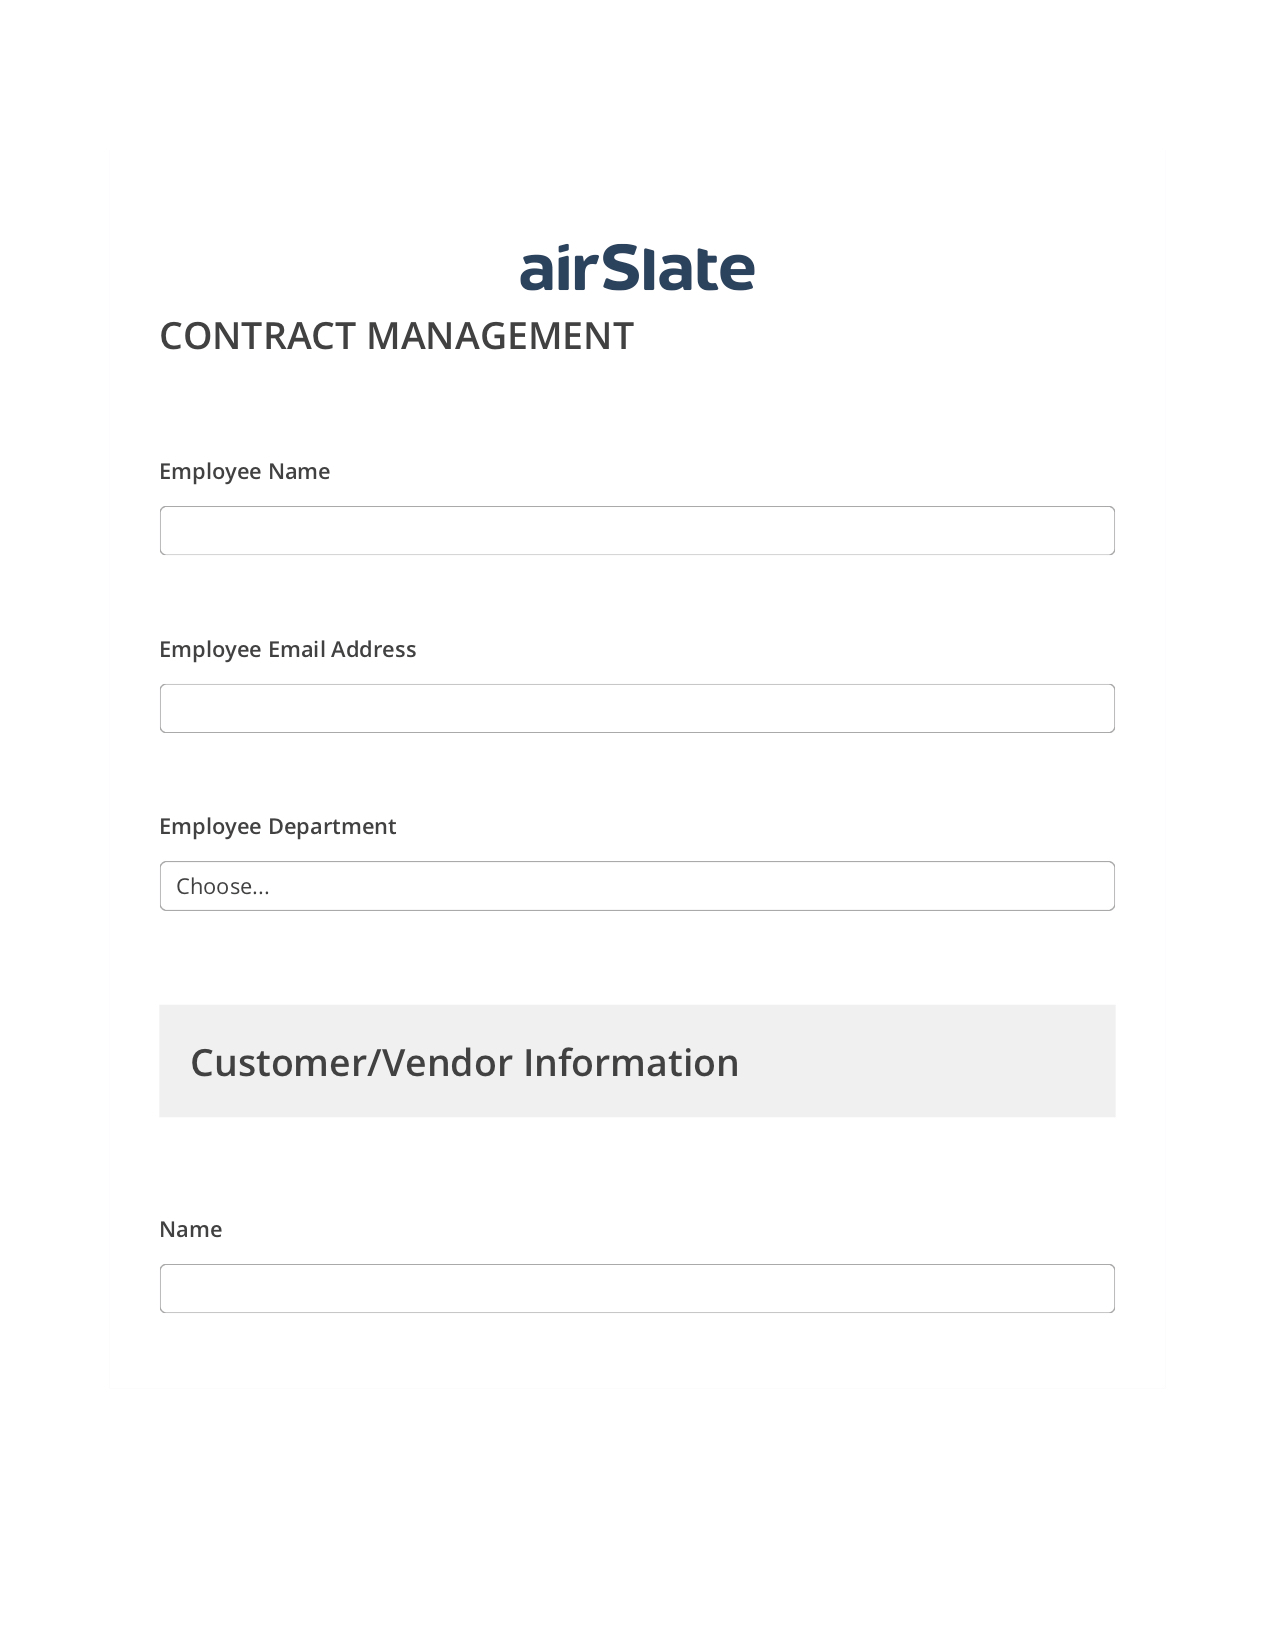 Multirole Contract Management Workflow Pre-fill Slate from MS Dynamics 365 record, Send a Slate to Salesforce Contact Bot, Export to Google Sheet Bot